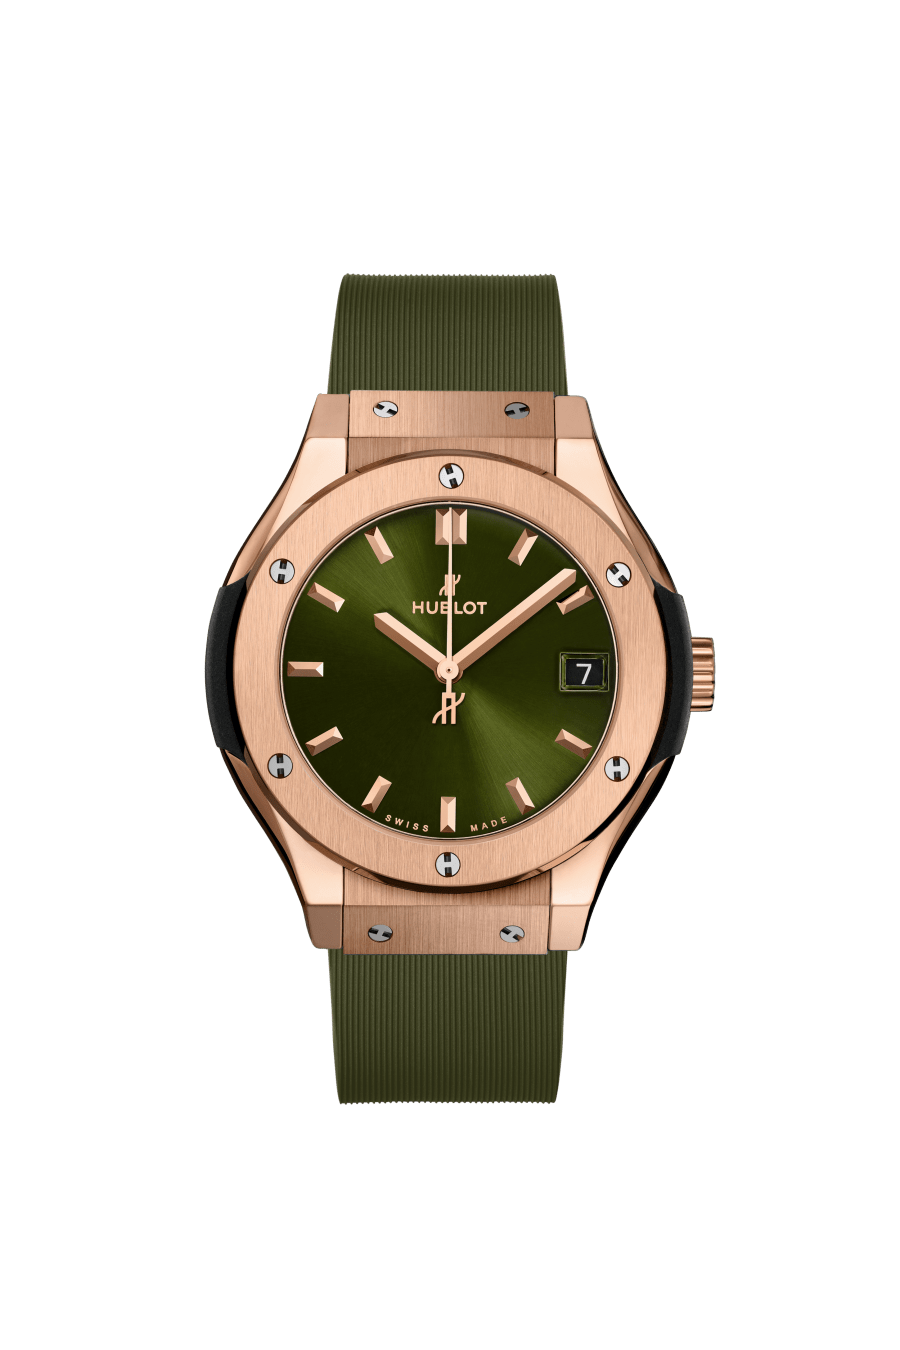 King Gold Green 33MM CLASSIC FUSION Référence :  581.OX.8980.RX -1